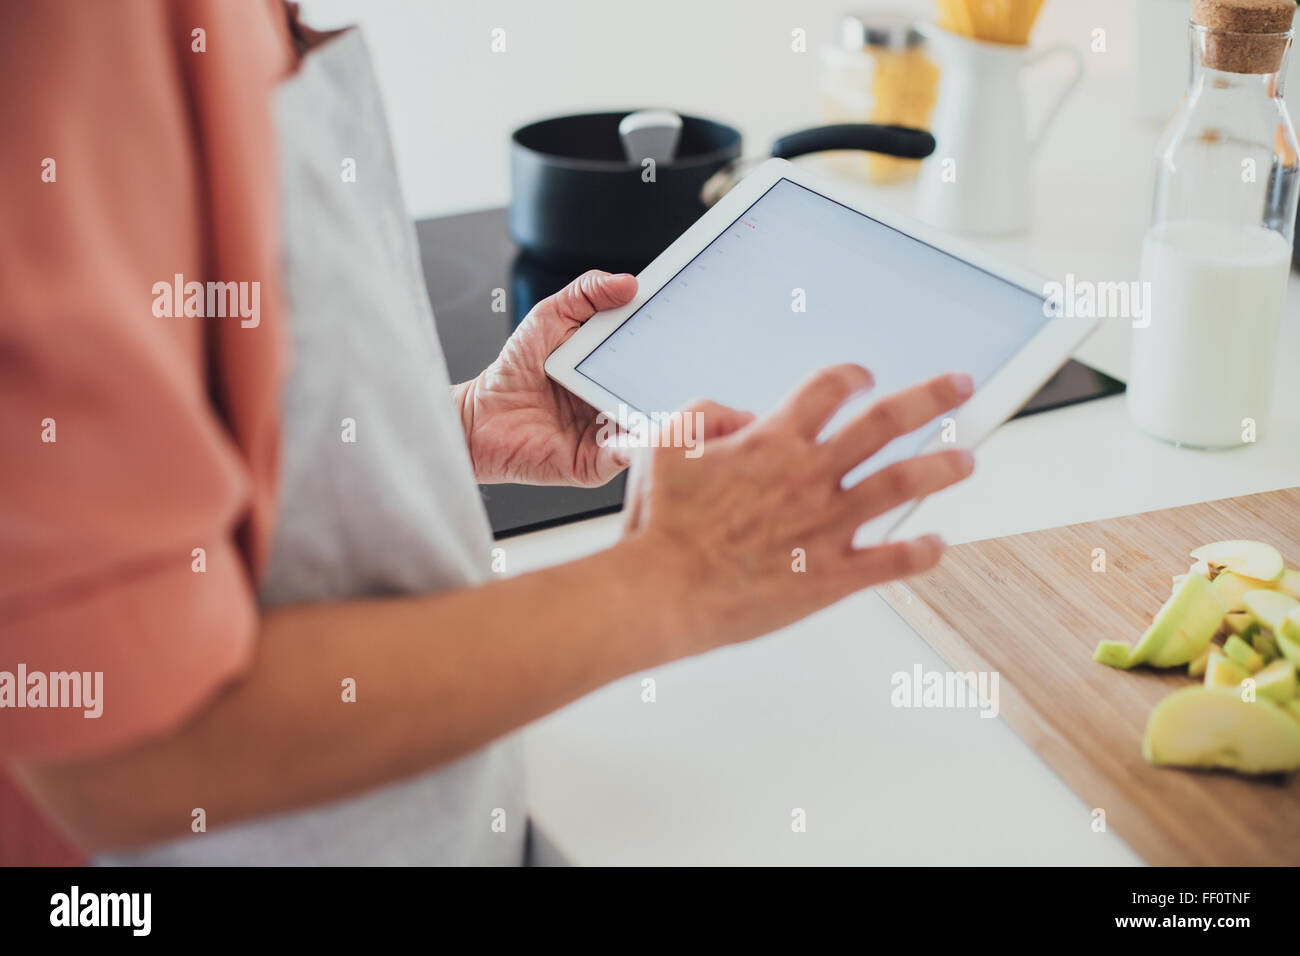 Older Caucasian woman using digital tablet in kitchen Banque D'Images